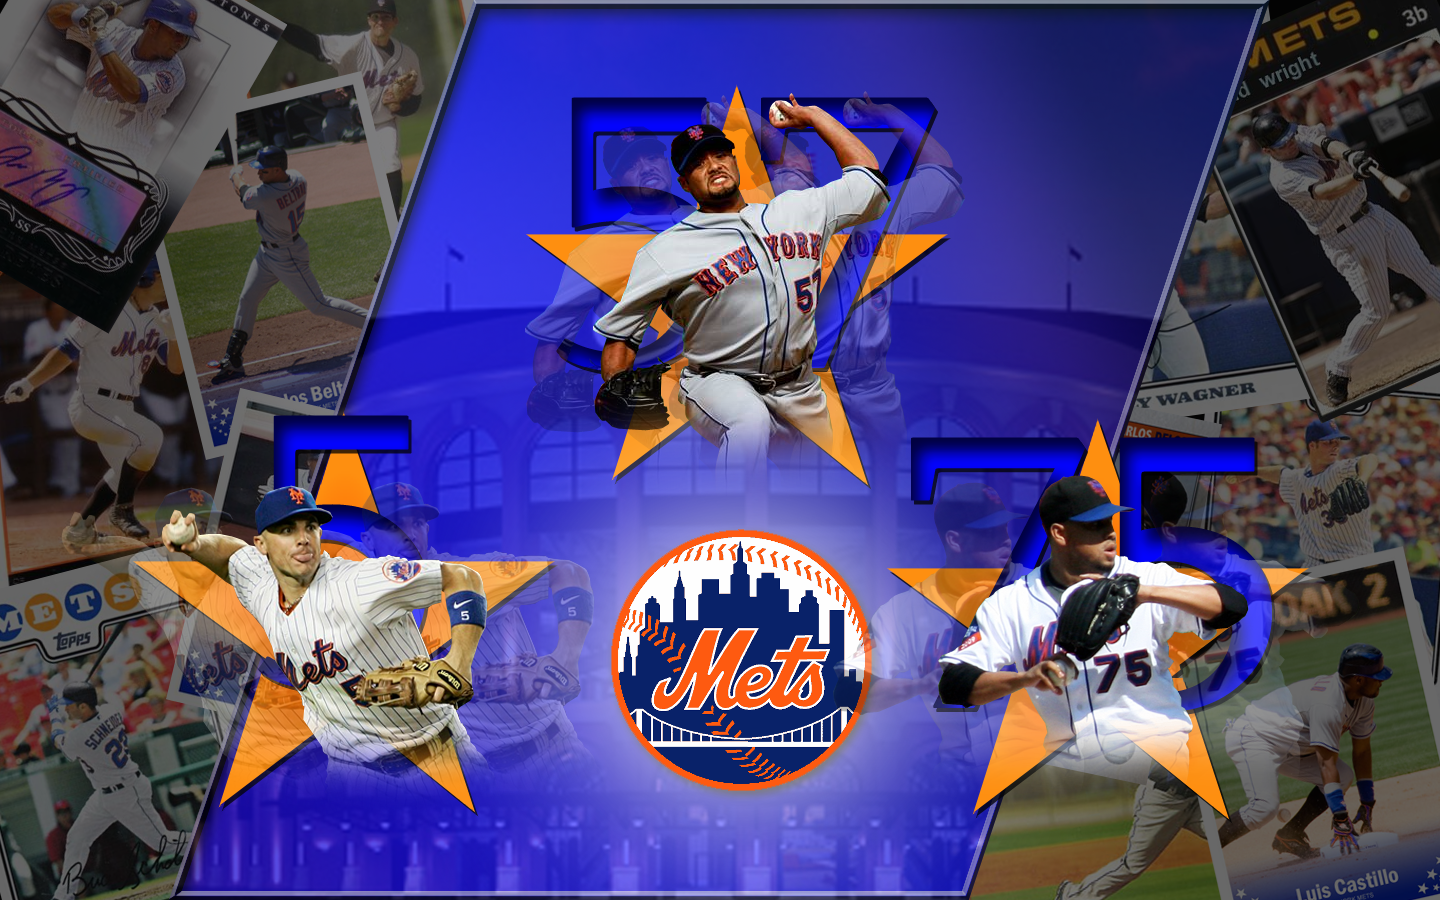 Mets Wallpaper by GRP 2009 on